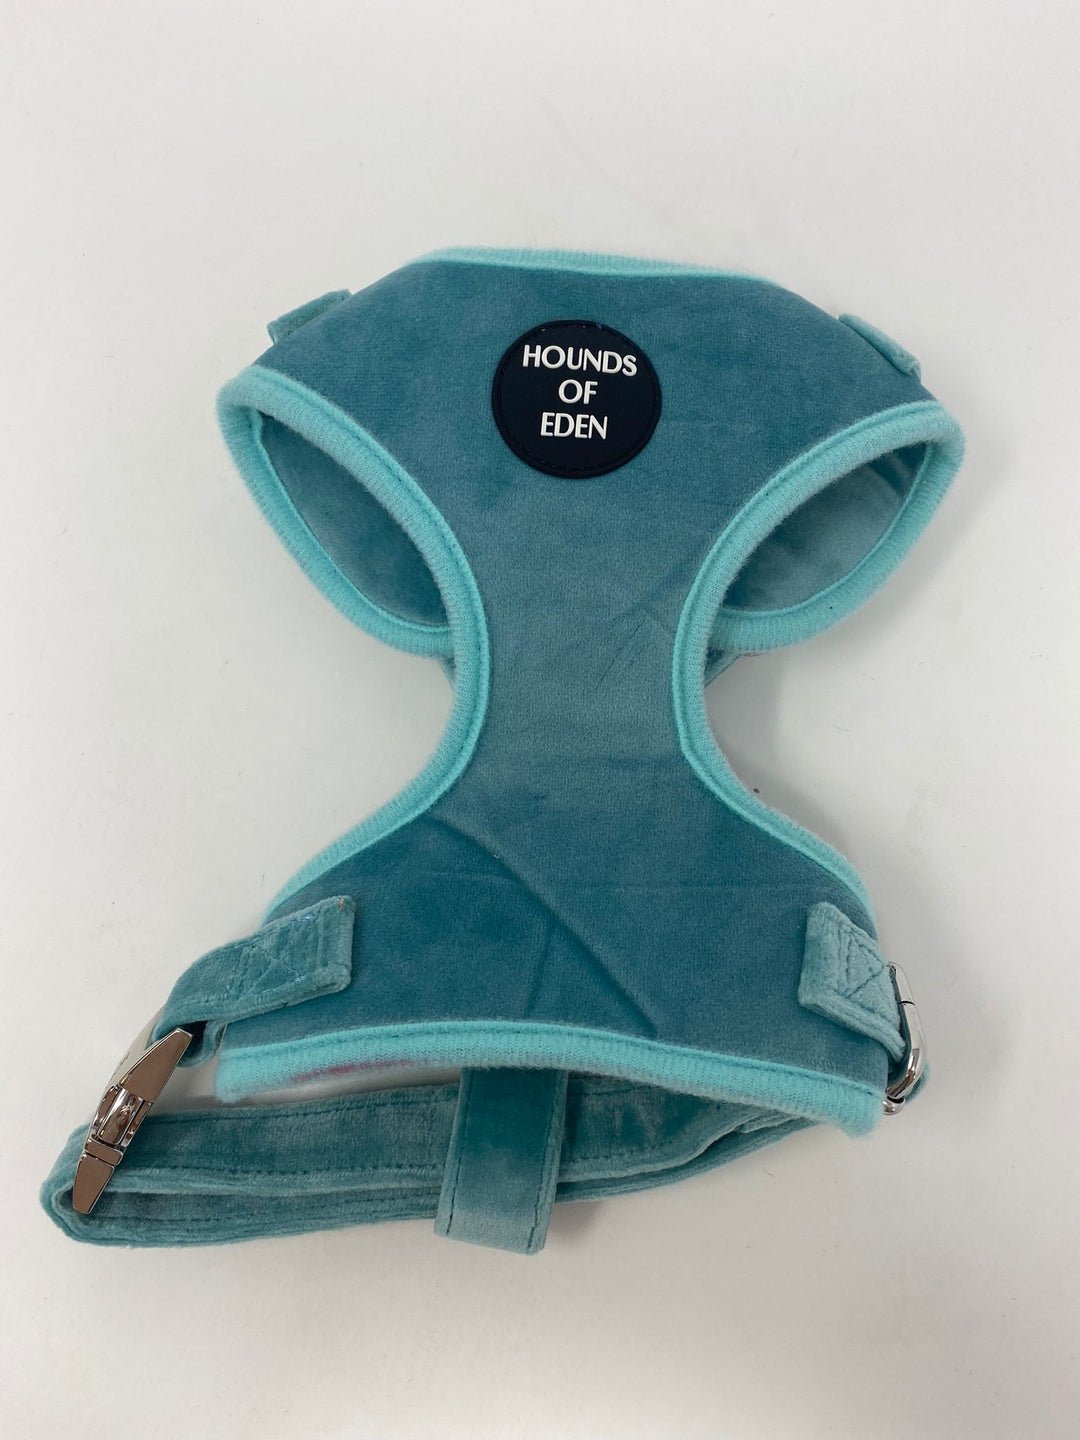 Outlet - XS TIFFANY'S - LIGHT TEAL VELVET DOG HARNESS WITH SILVER METAL HARDWARE - 0085